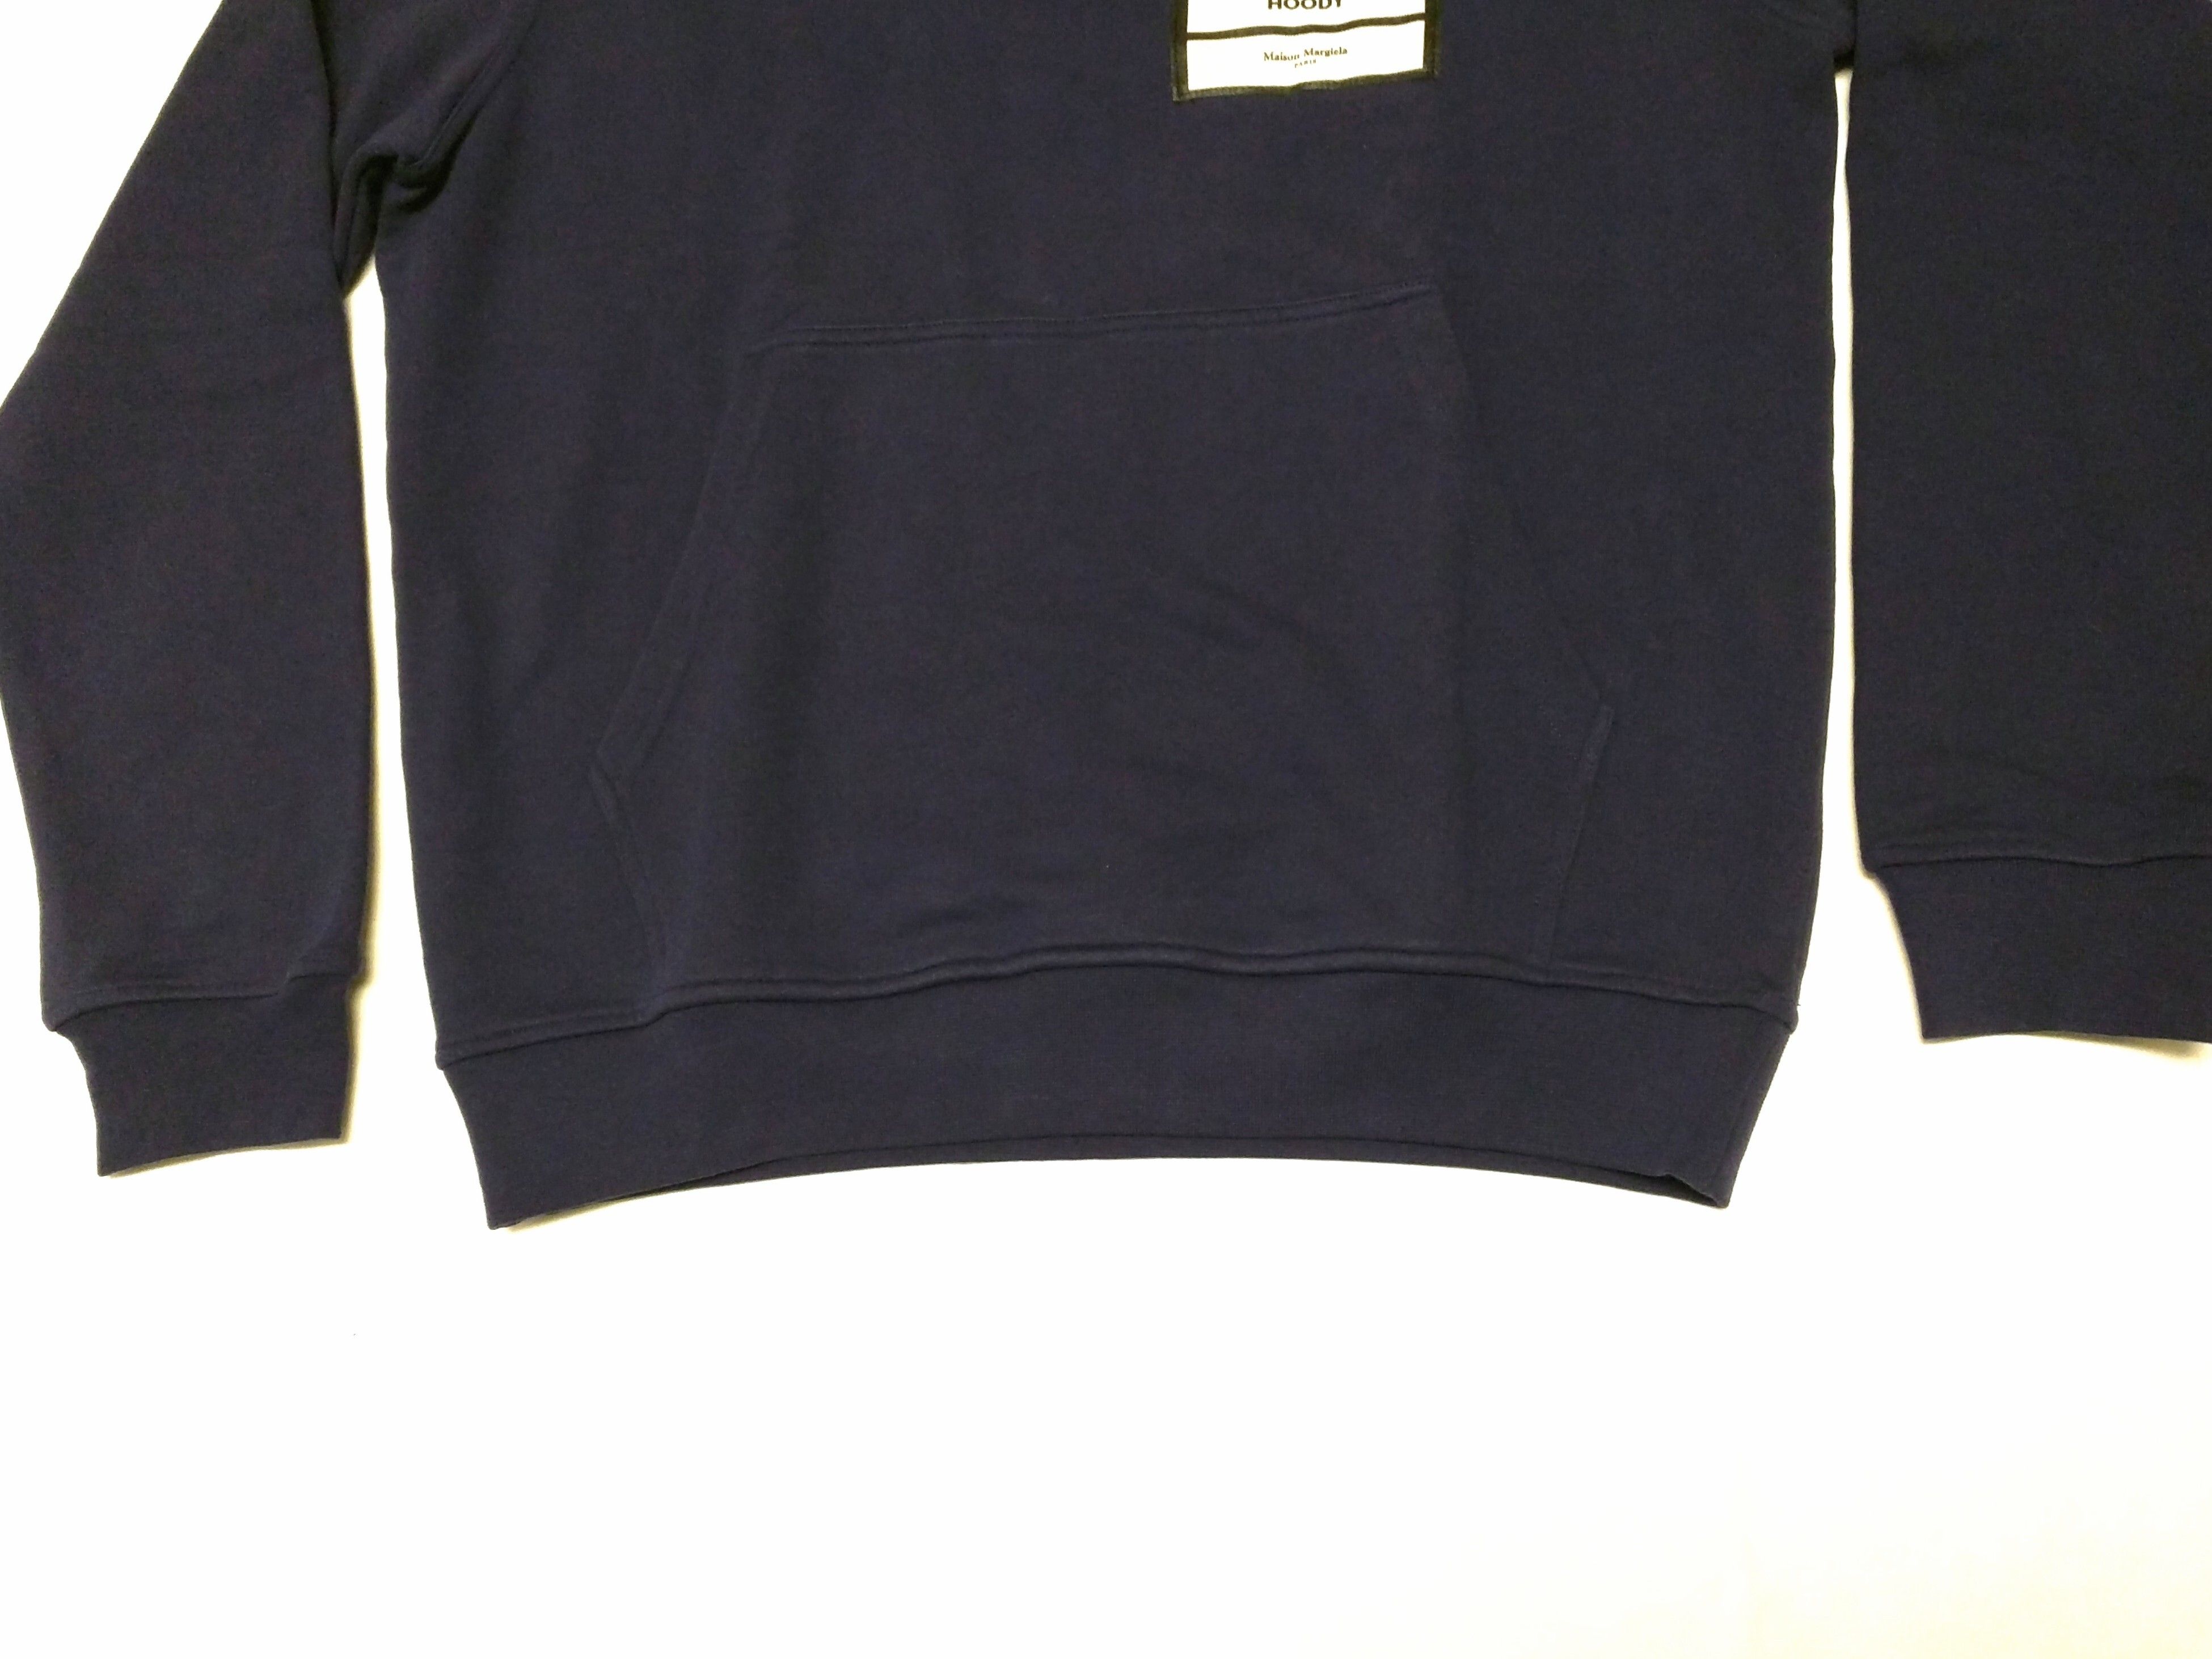 Maison Margiela Stereotype Hoodie Navy Blue 48 MMM Pullover Size US L / EU 52-54 / 3 - 5 Thumbnail